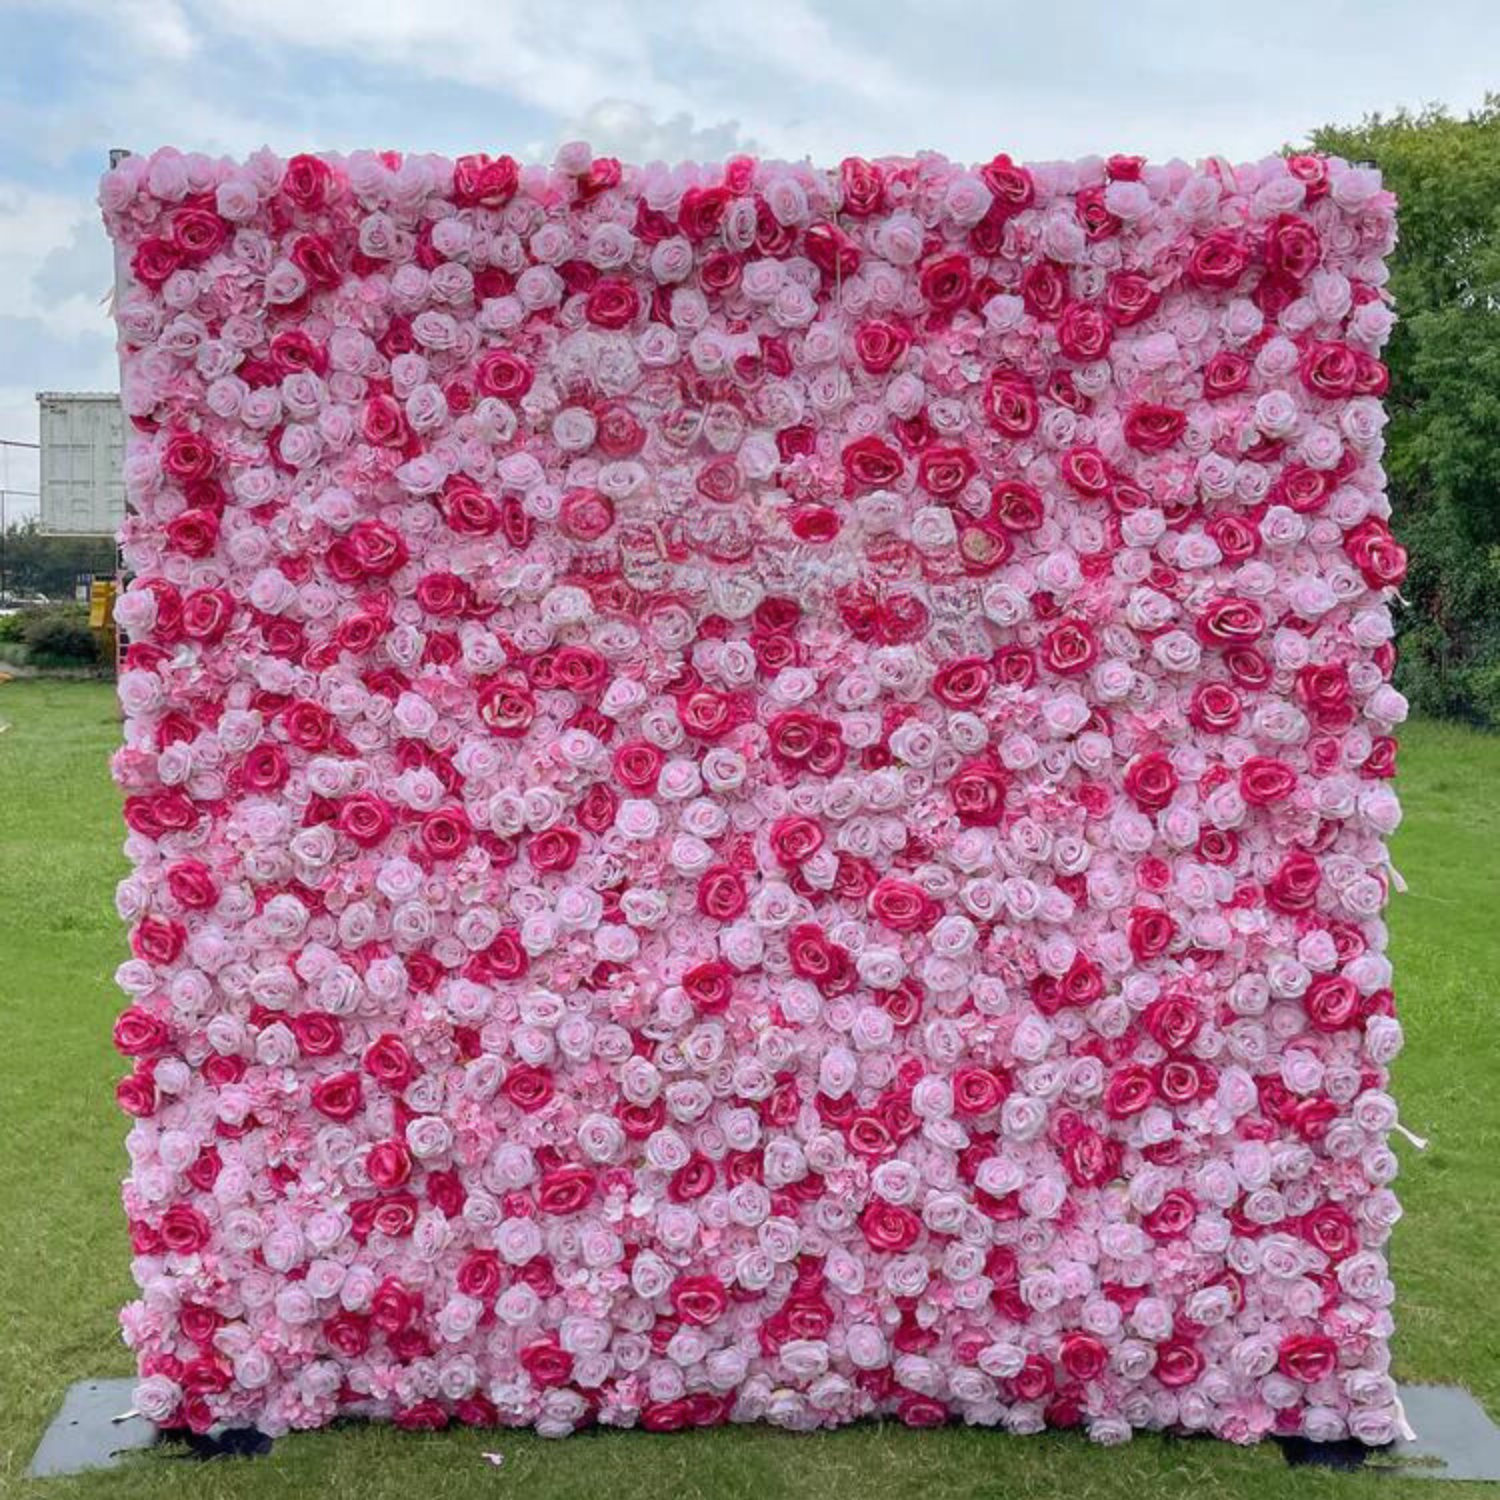 Pink Rose Wall Rental - Riverside Flower Wall Rental - Perfect Capture Booth | Photo Booth Rental.png